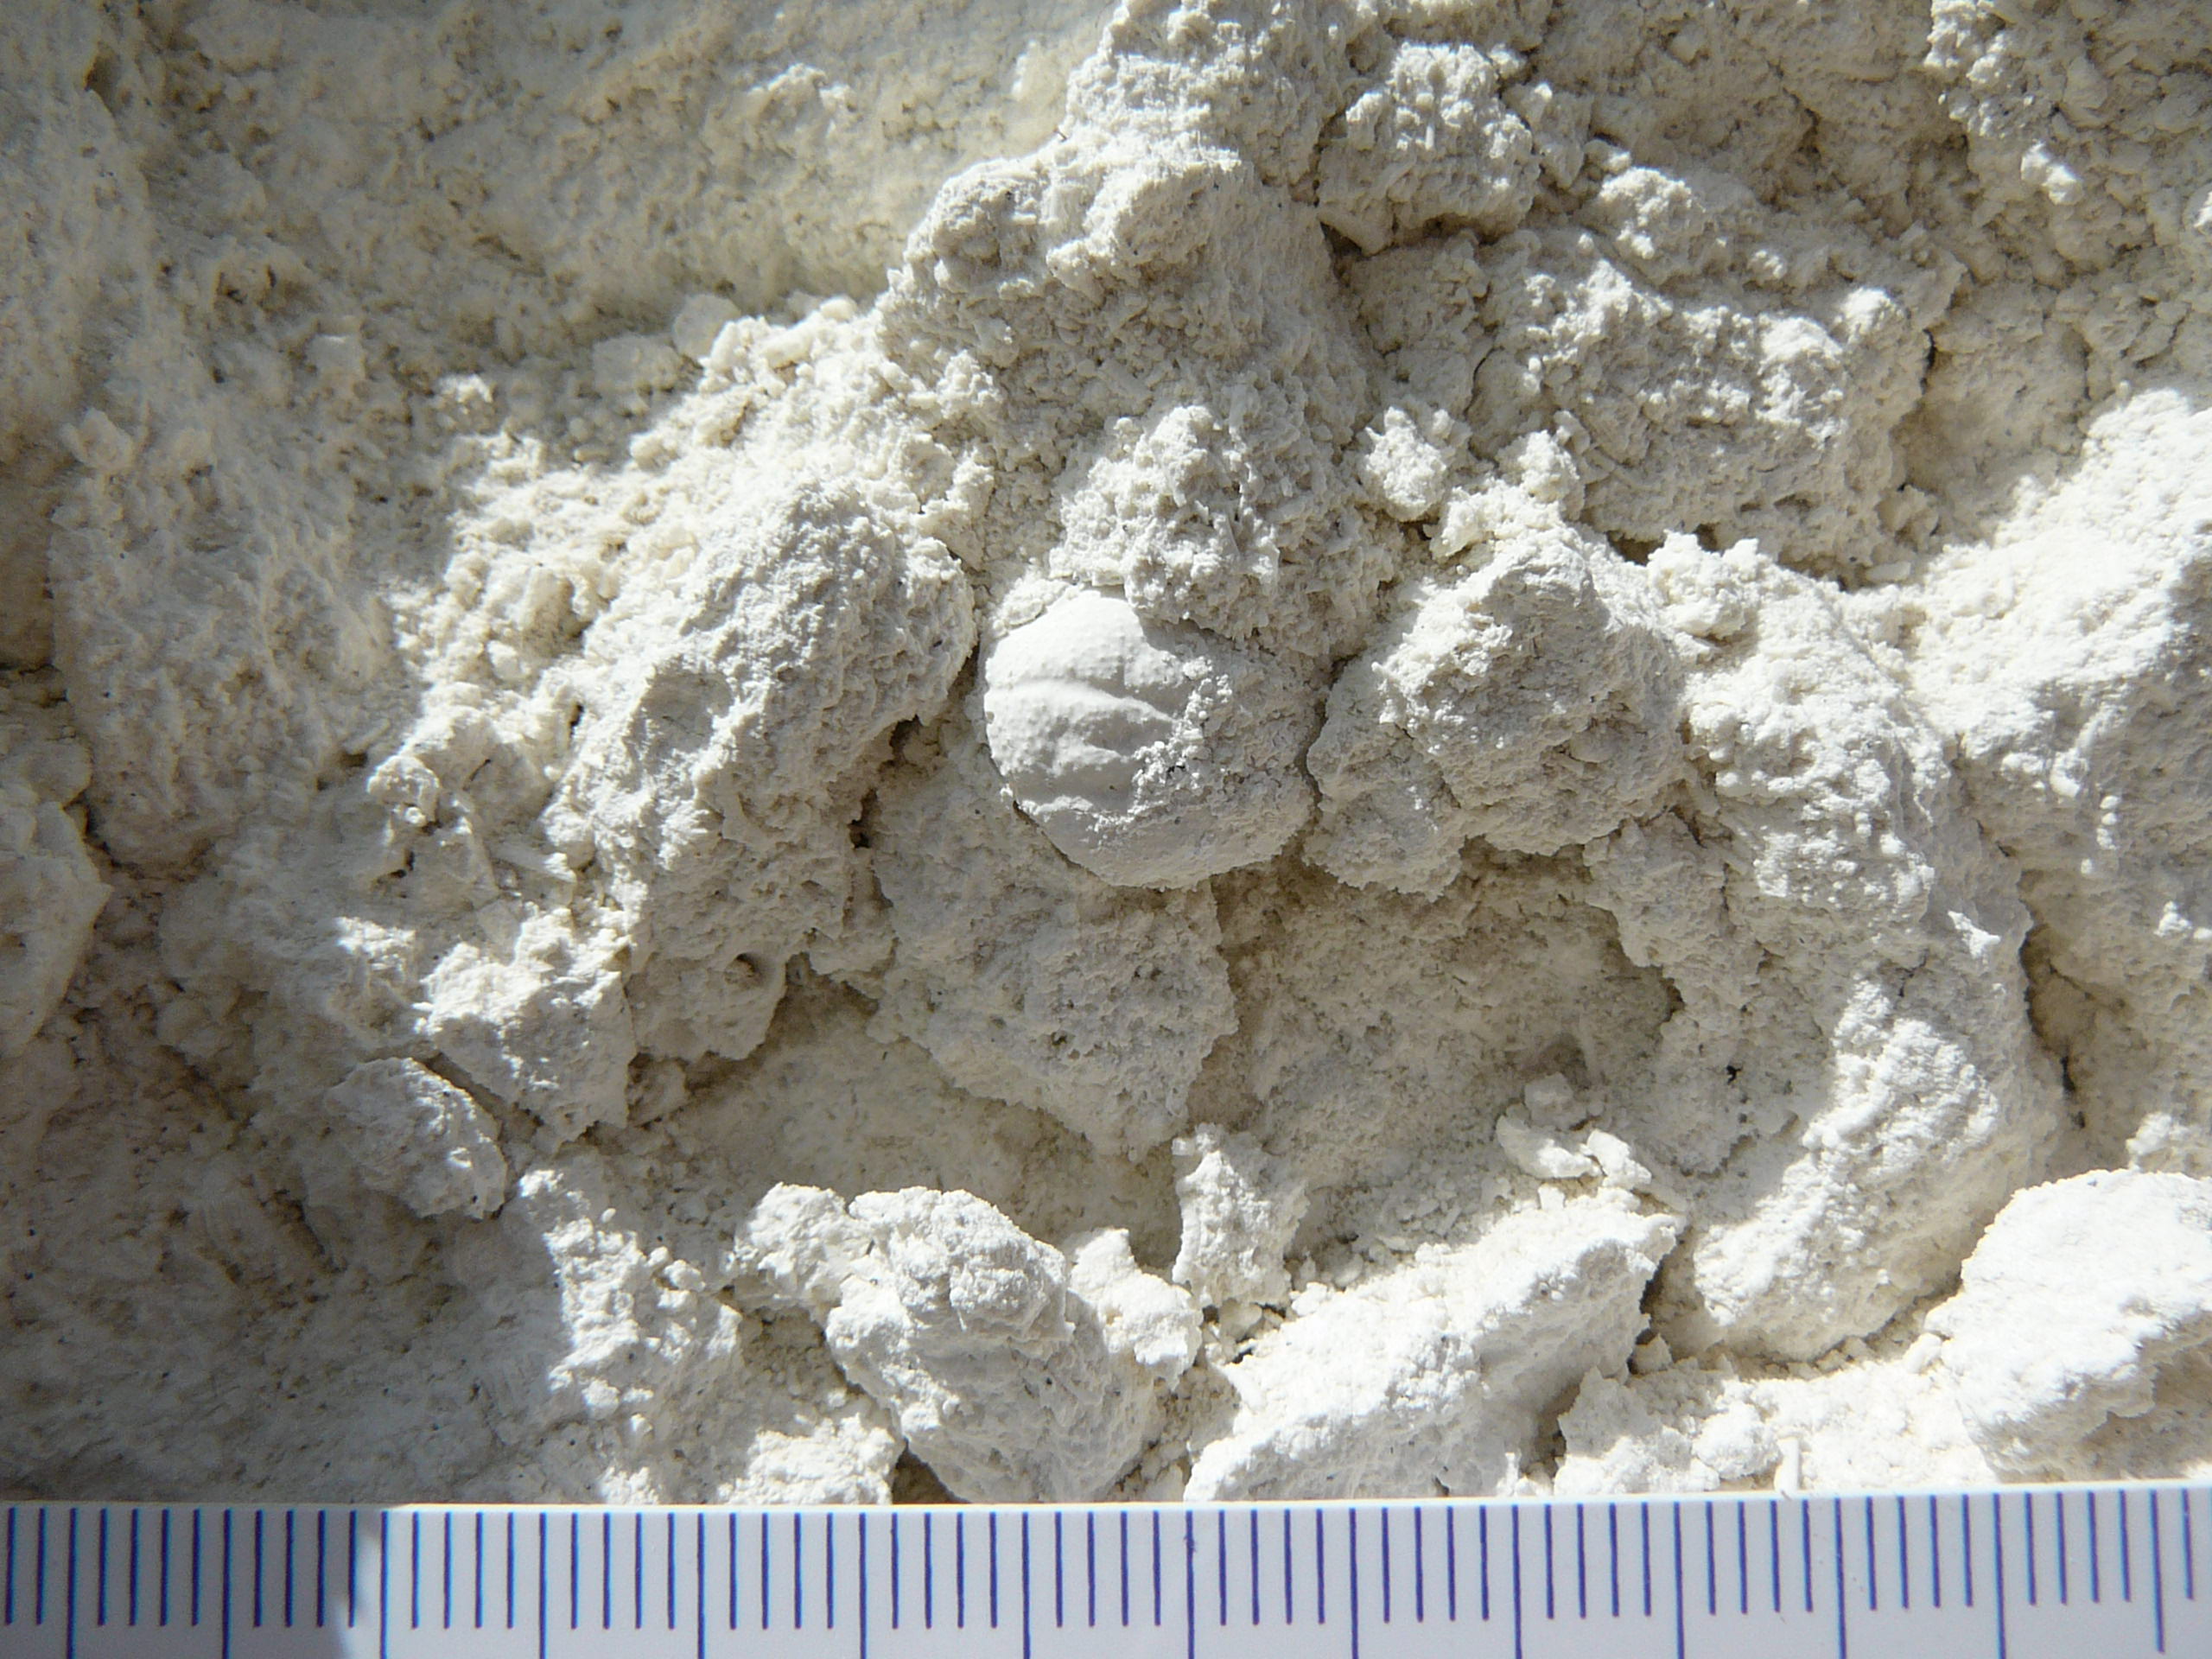 Some crabs can be readily seen in the wall of the quarry. Here an example of a partially exposed carapace of Dromiopsis rugosus.